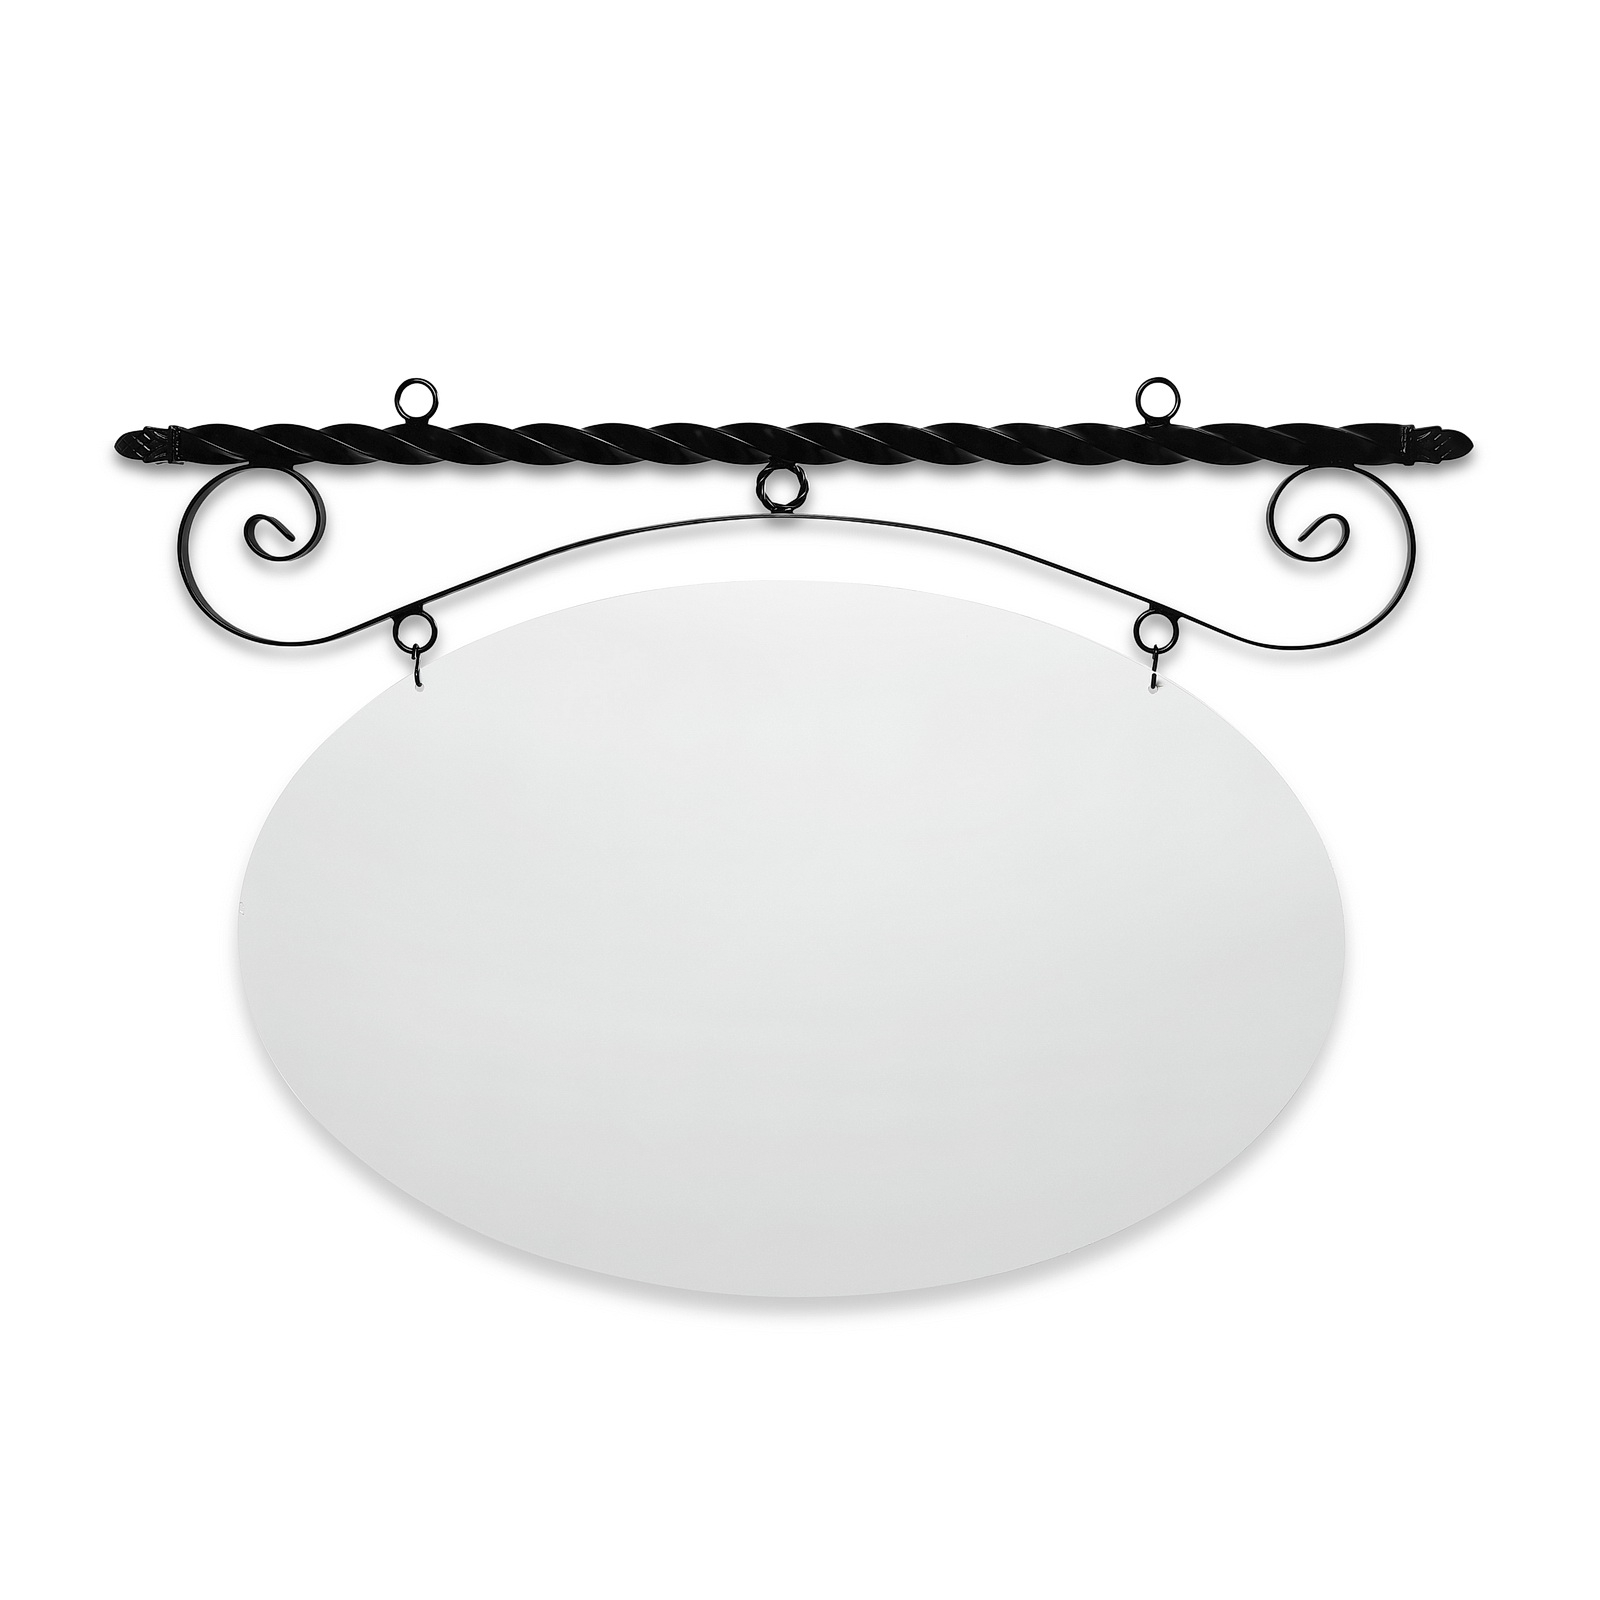 48'' Wide Ceiling Mount Bracket in  Black Powder Coated Steel with 30'' Tall X 46'' Wide X .080'' Thick White Aluminum Sign Blank and 2 Black Powder Coated S-Hooks (Pineapple Finial)